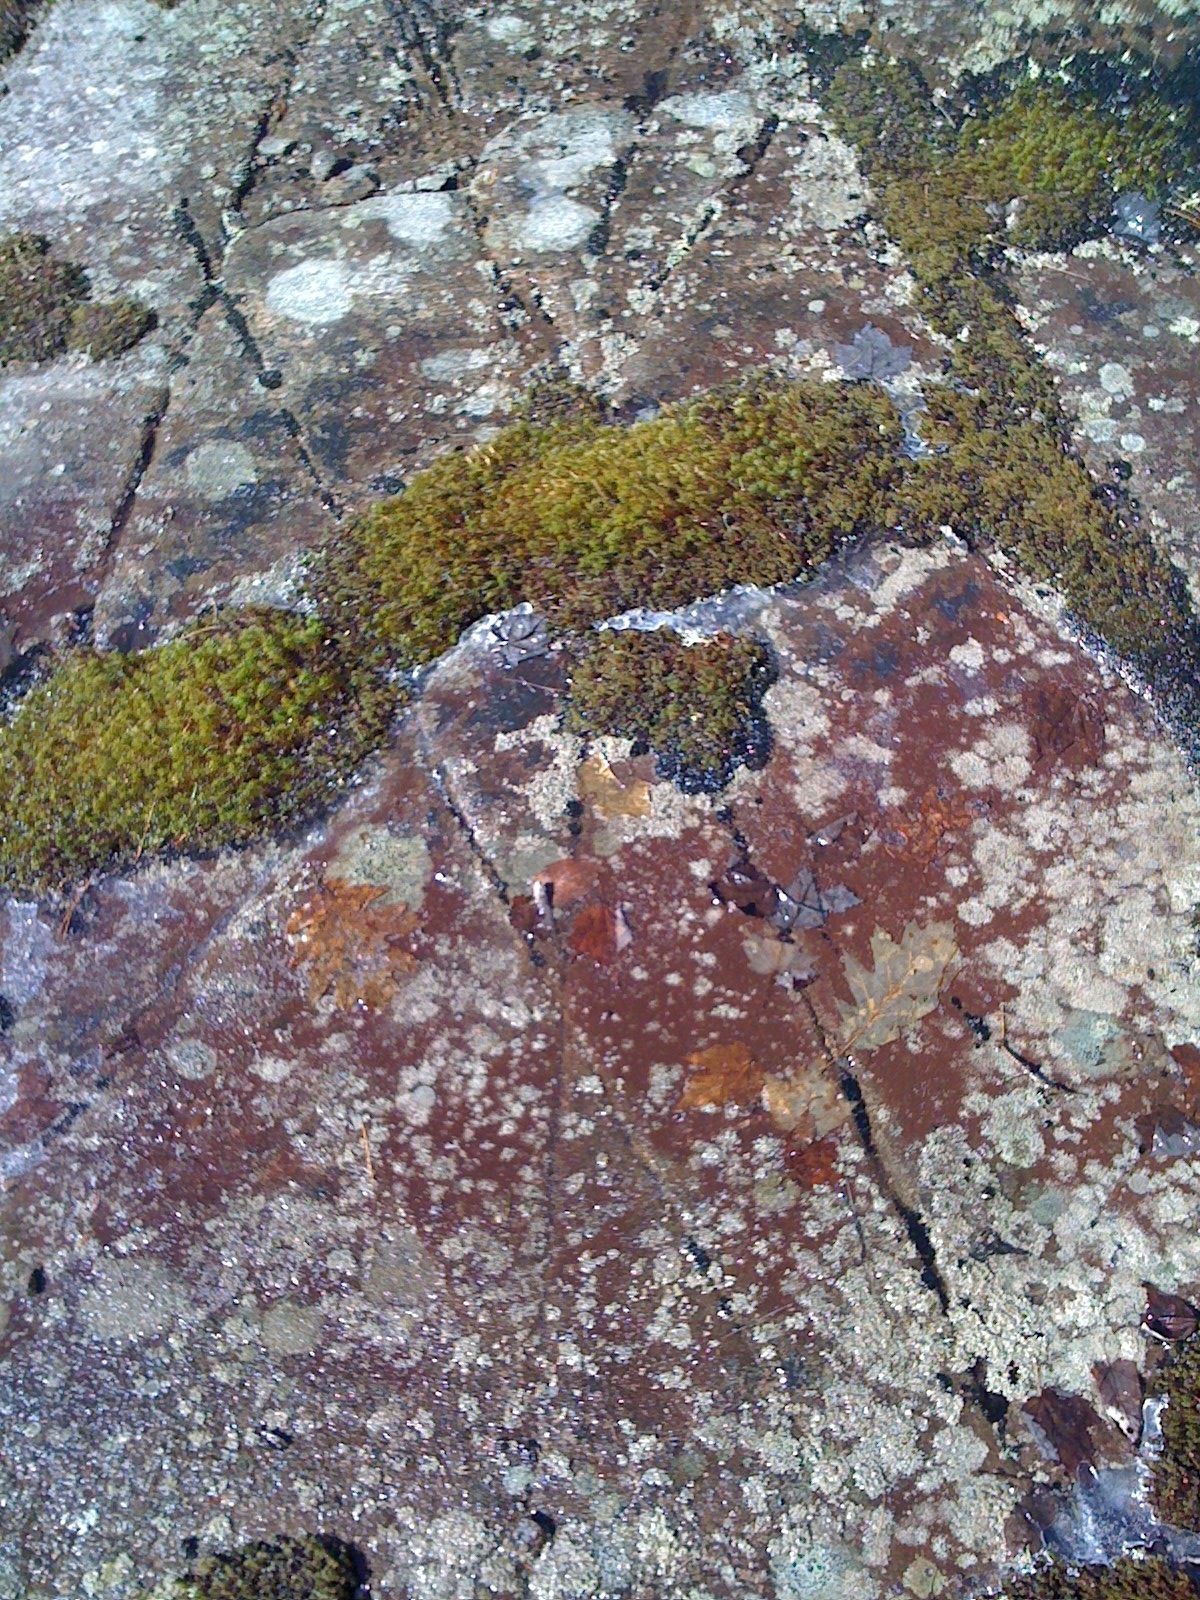 a rock has some green and red moss growing on it